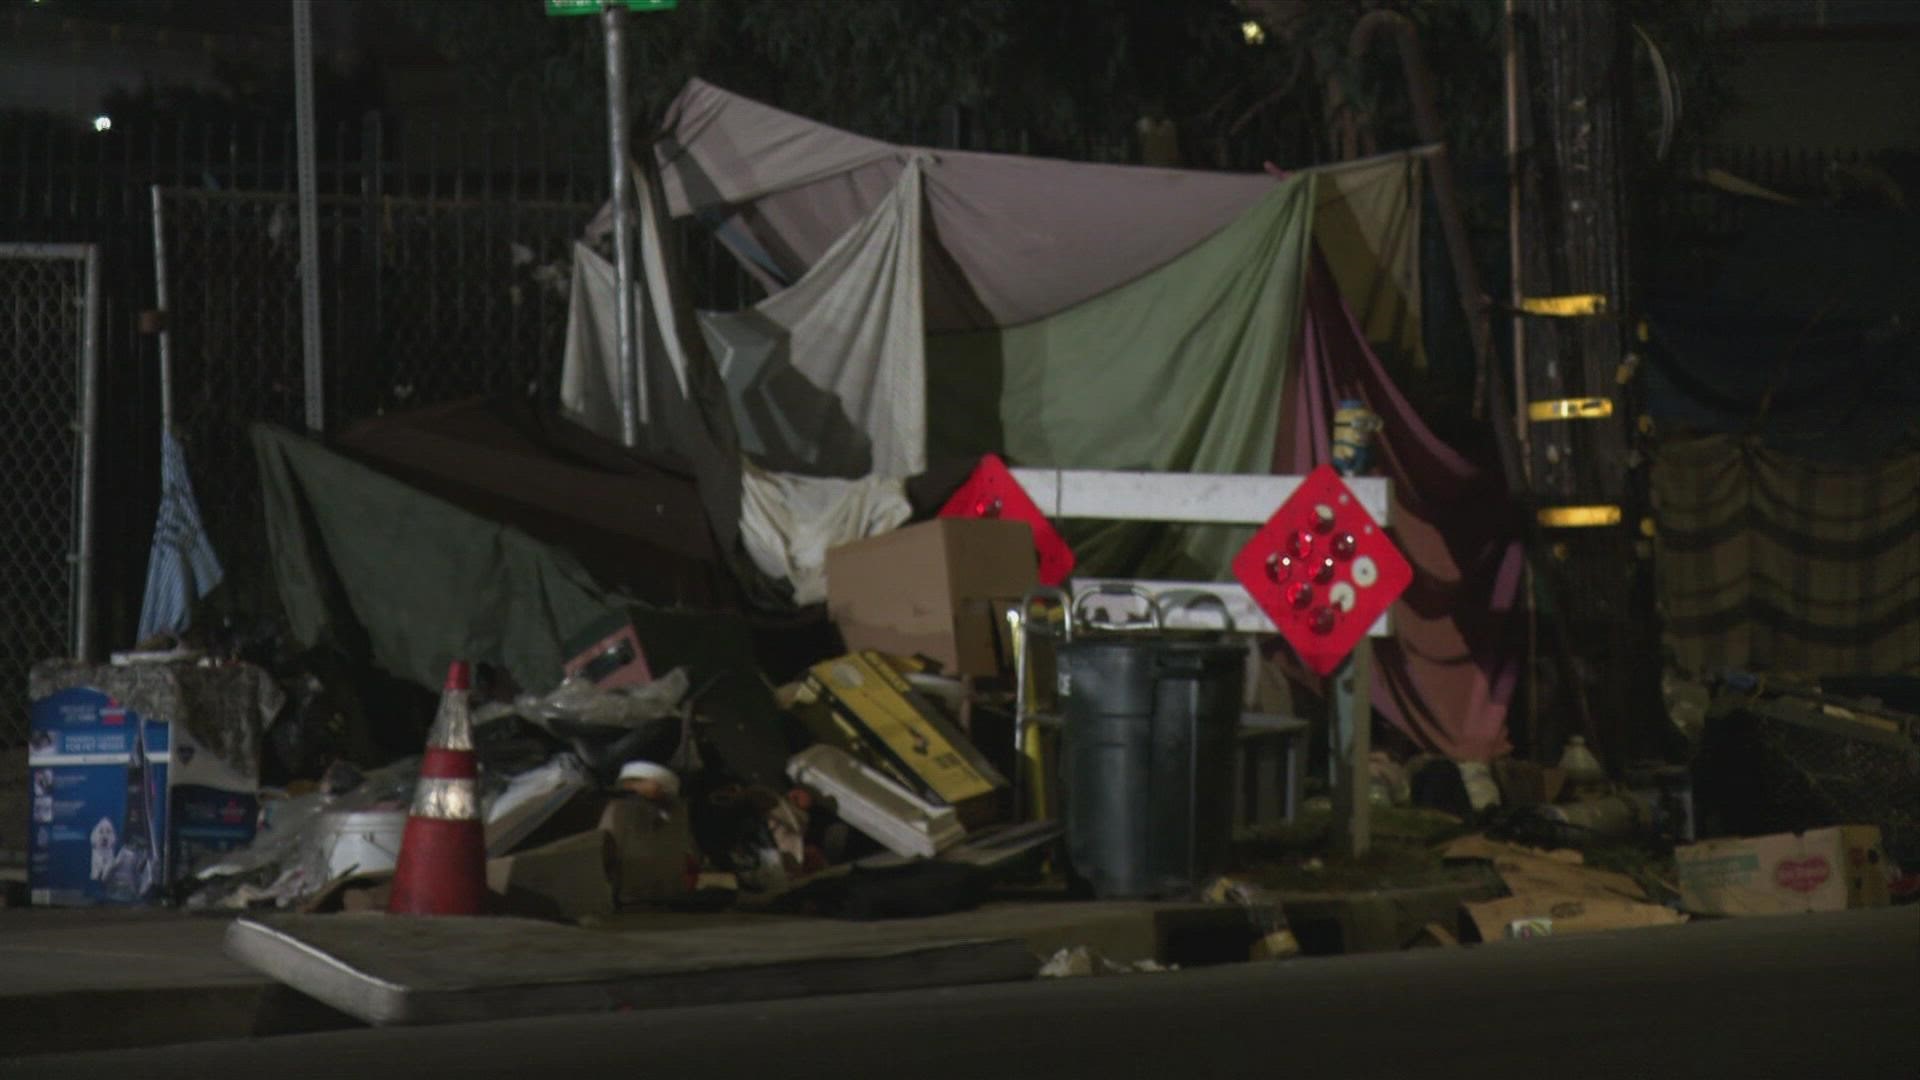 Cal Trans continues to clear homeless camps in Stockton.